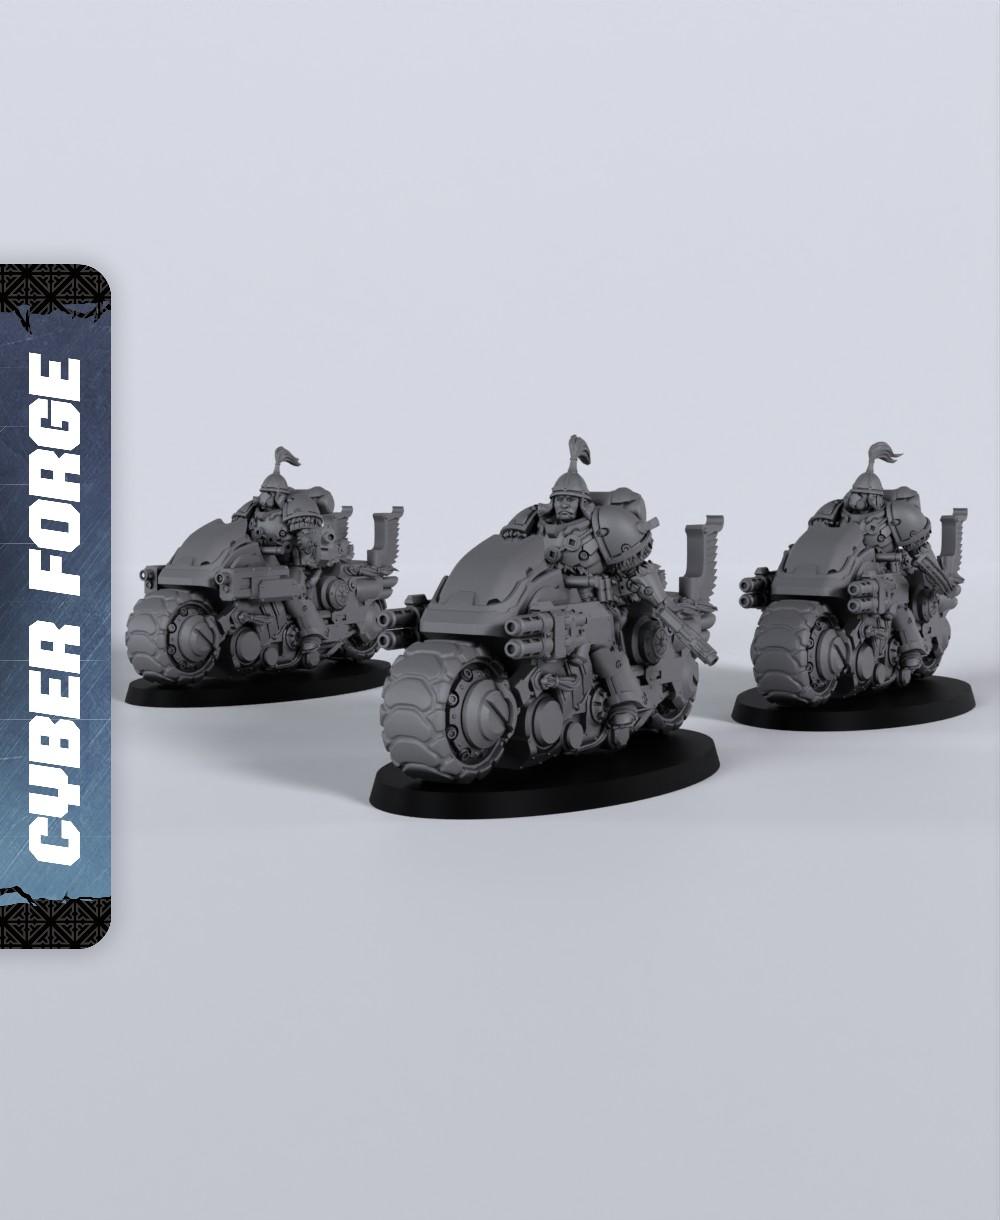 Bike Squad - With Free Cyberpunk Warhammer - 40k Sci-Fi Gift Ideas for RPG and Wargamers 3d model